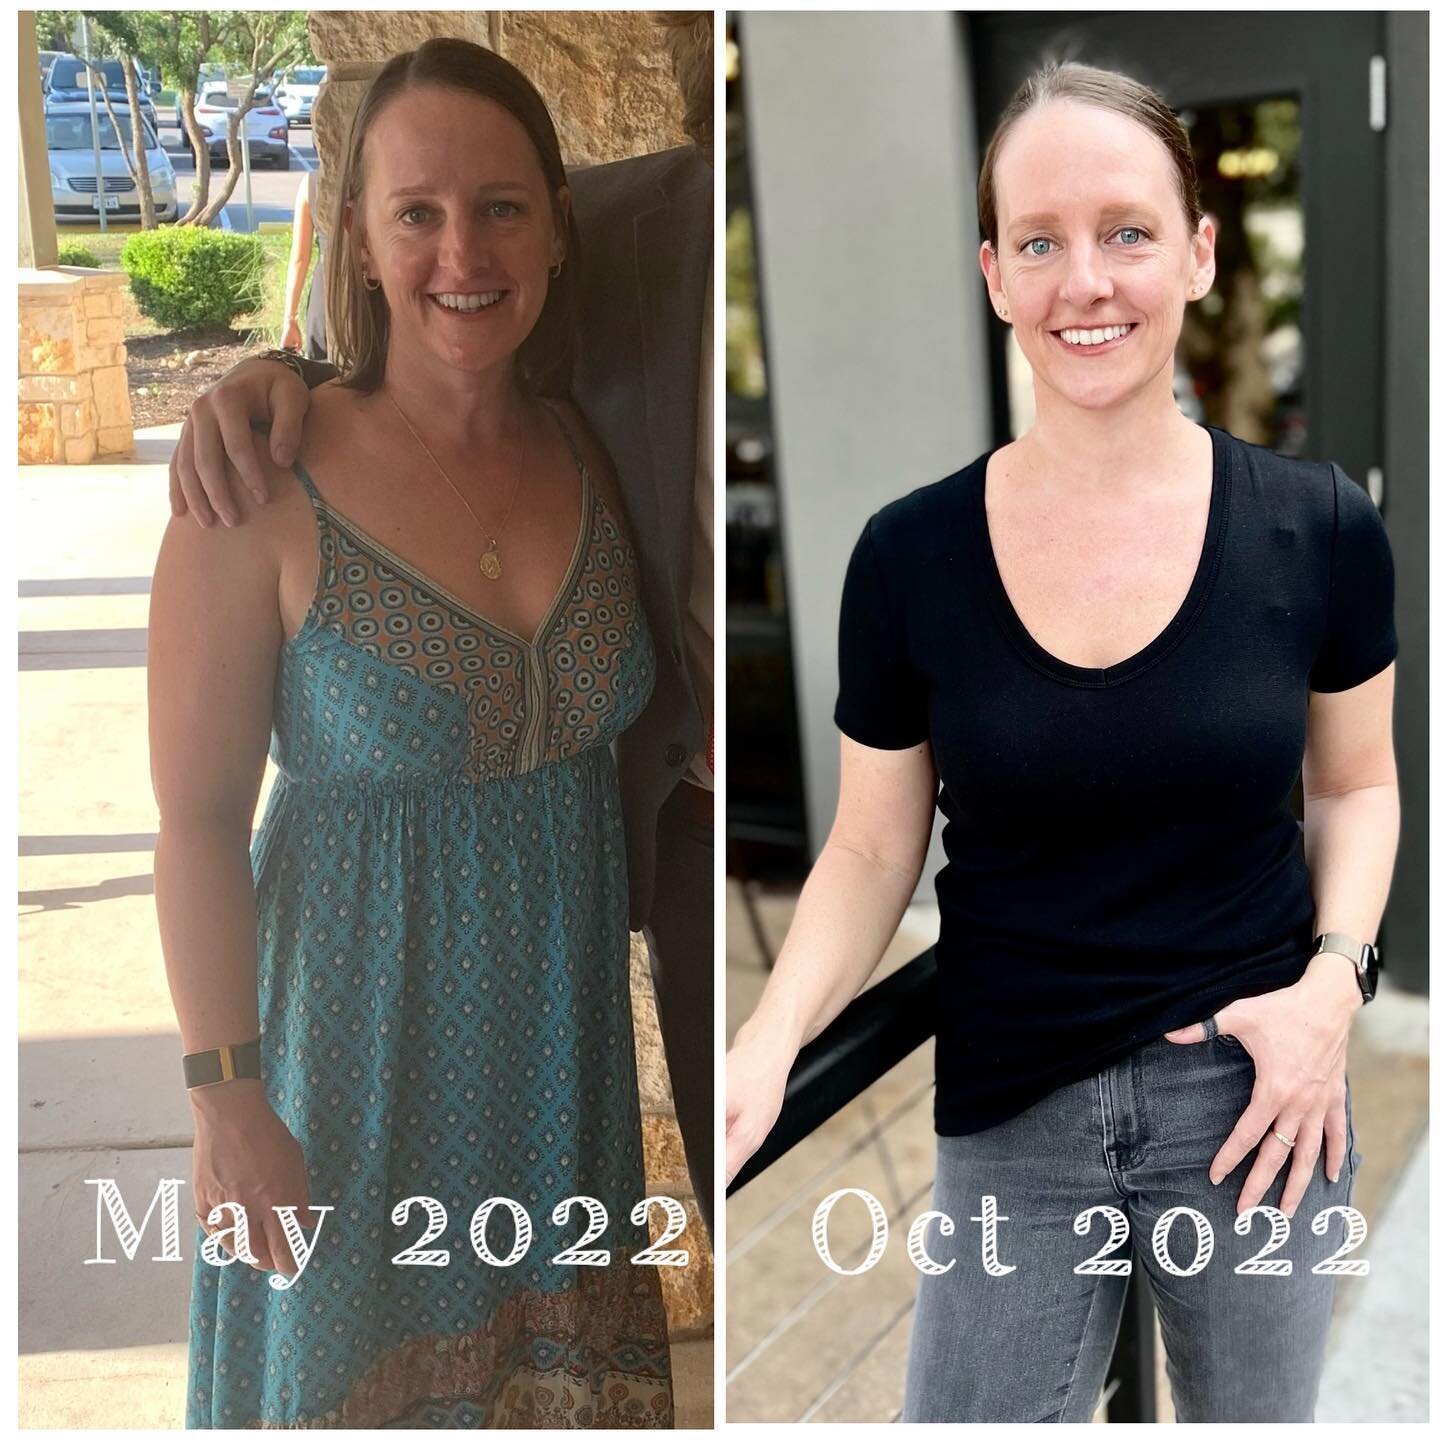 Wow, fantastic transformation from my client @pegleg02 . She used a three-pronged approach of strength training, Pilates, and a healthcare professional to accomplish this and, in her words, &ldquo;help me get back to the body that matches what I feel